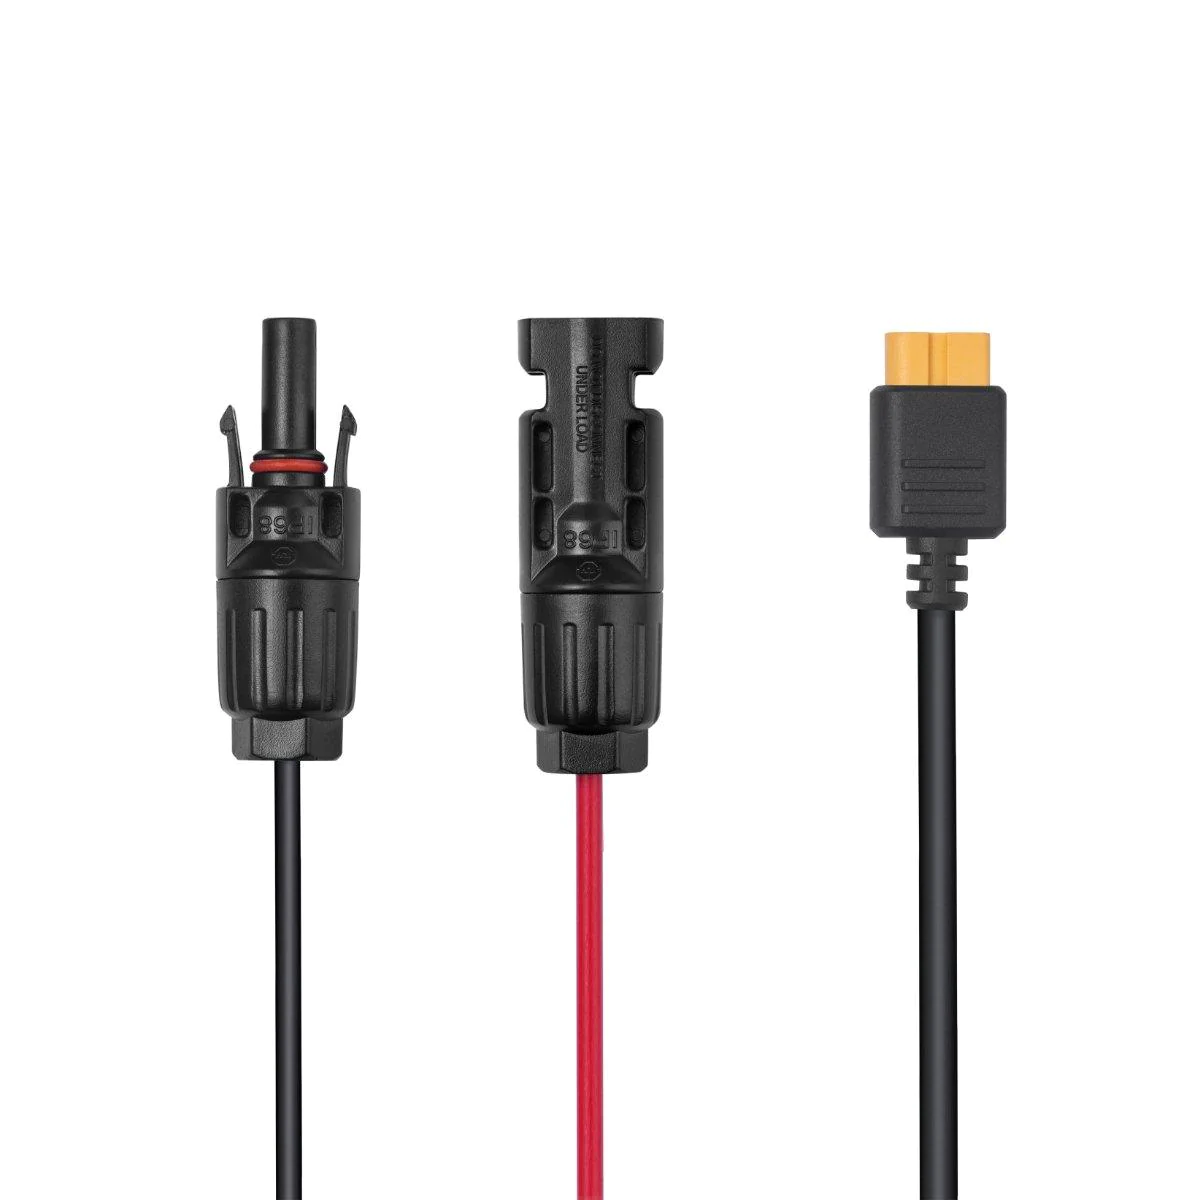 EcoFlow Solar to XT60 Charging Cable